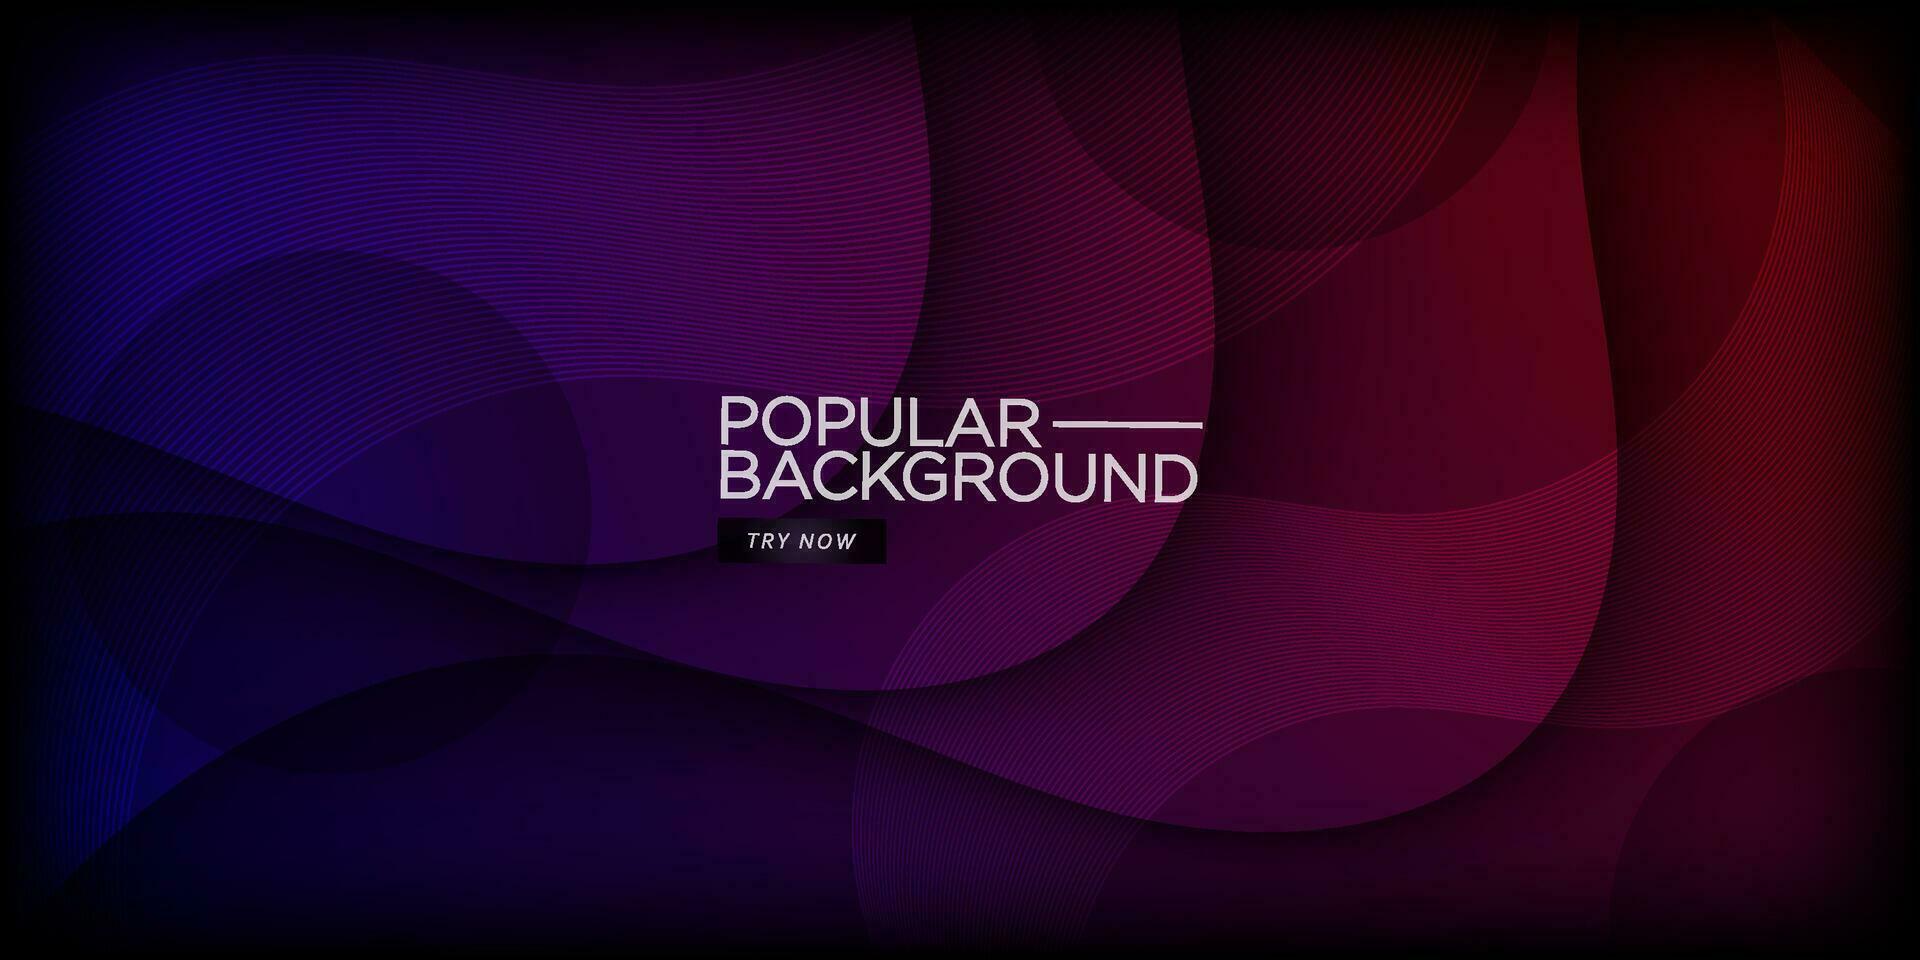 Futuristic wave abstract background with dark red and blue gradient color on background with wavy lines shadow pattern. Eps10 Illustration vector